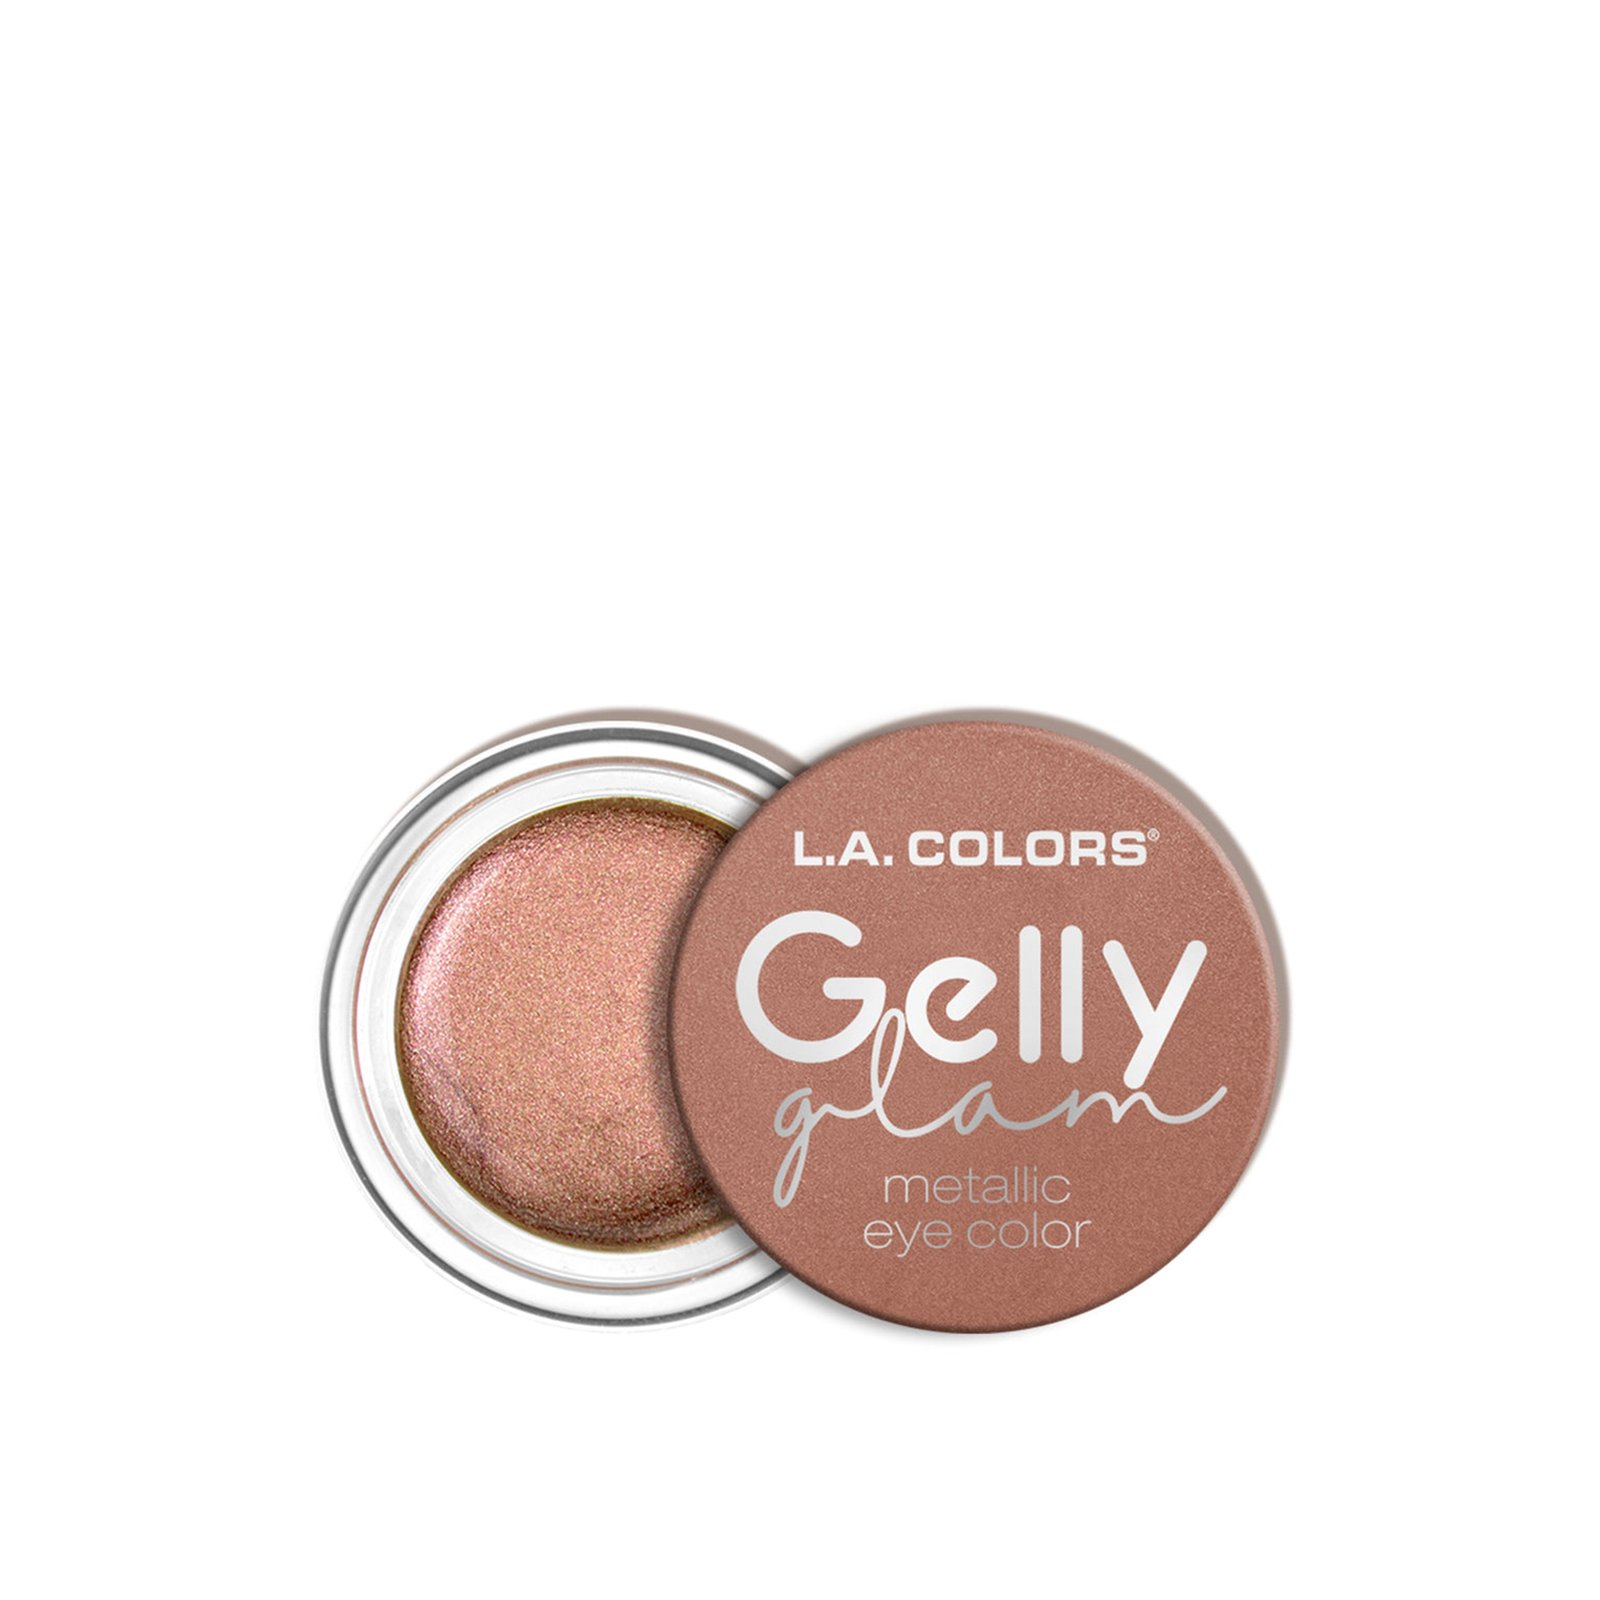 L.A Colors Gelly Glam Metallic Eye Color CES285 Extra 5ml (0.17 fl oz)